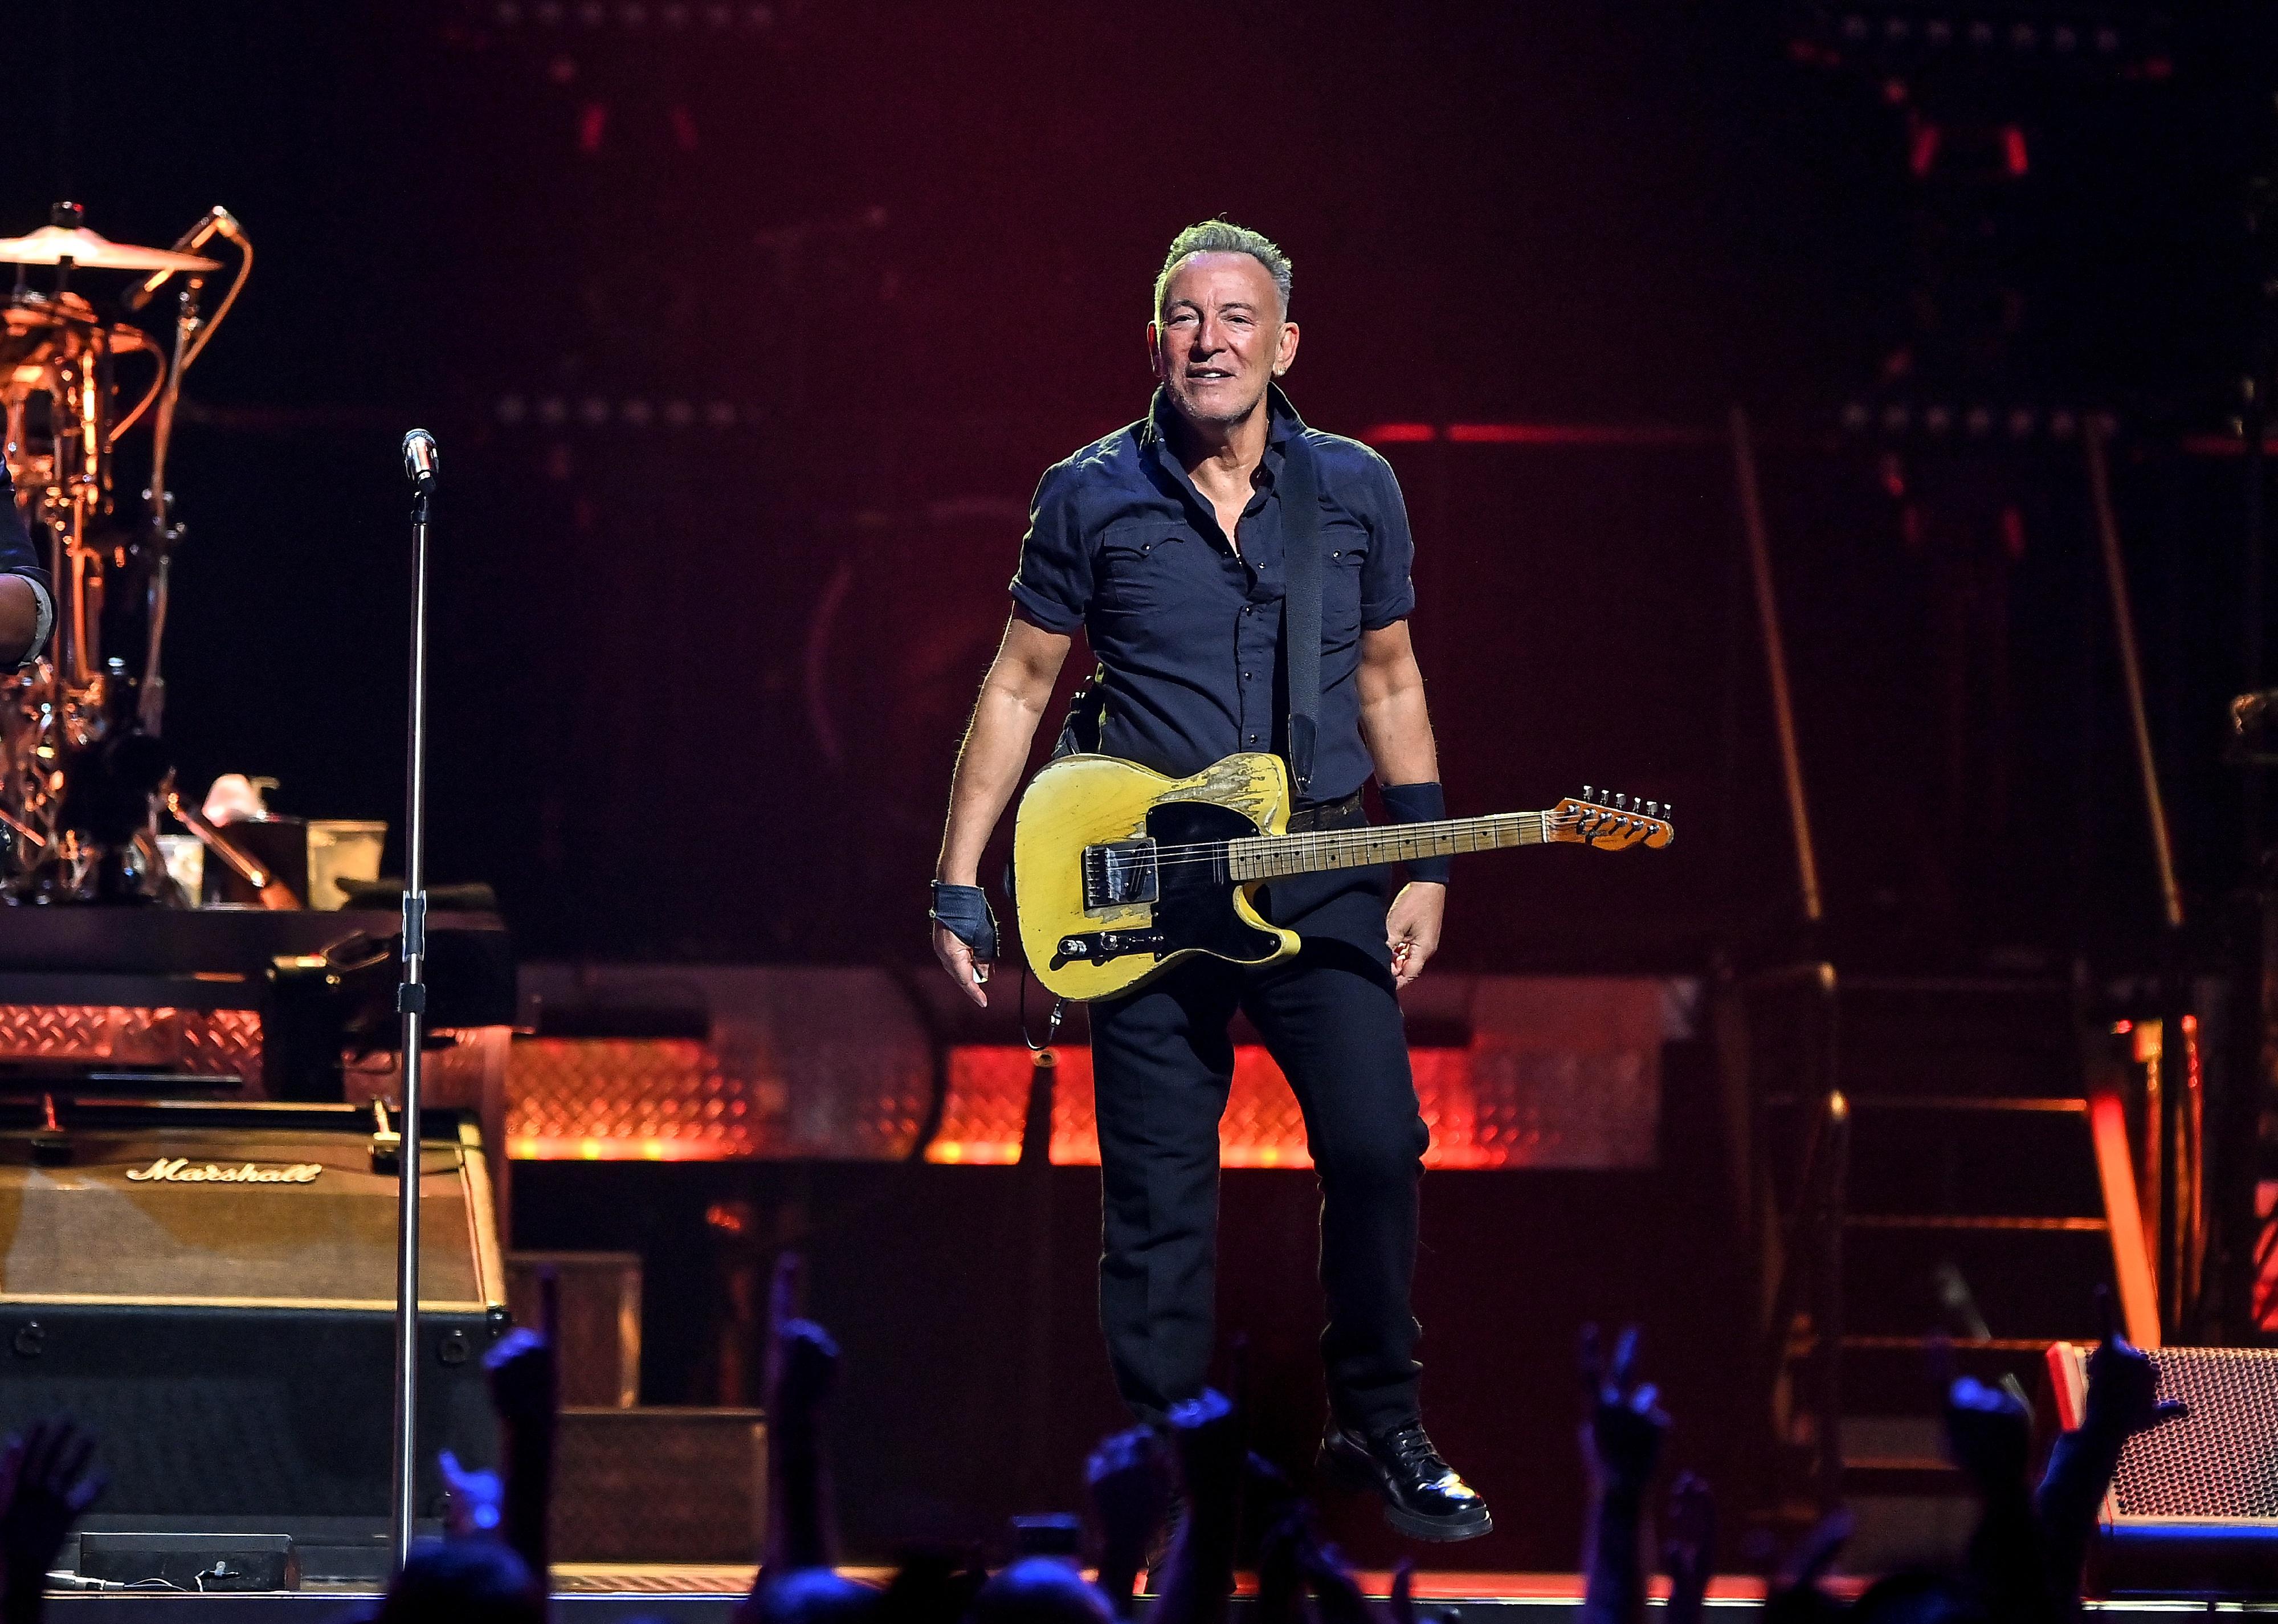 Bruce Springsteen performs onstage during the Bruce Springsteen and The E Street Band 2023 tour.